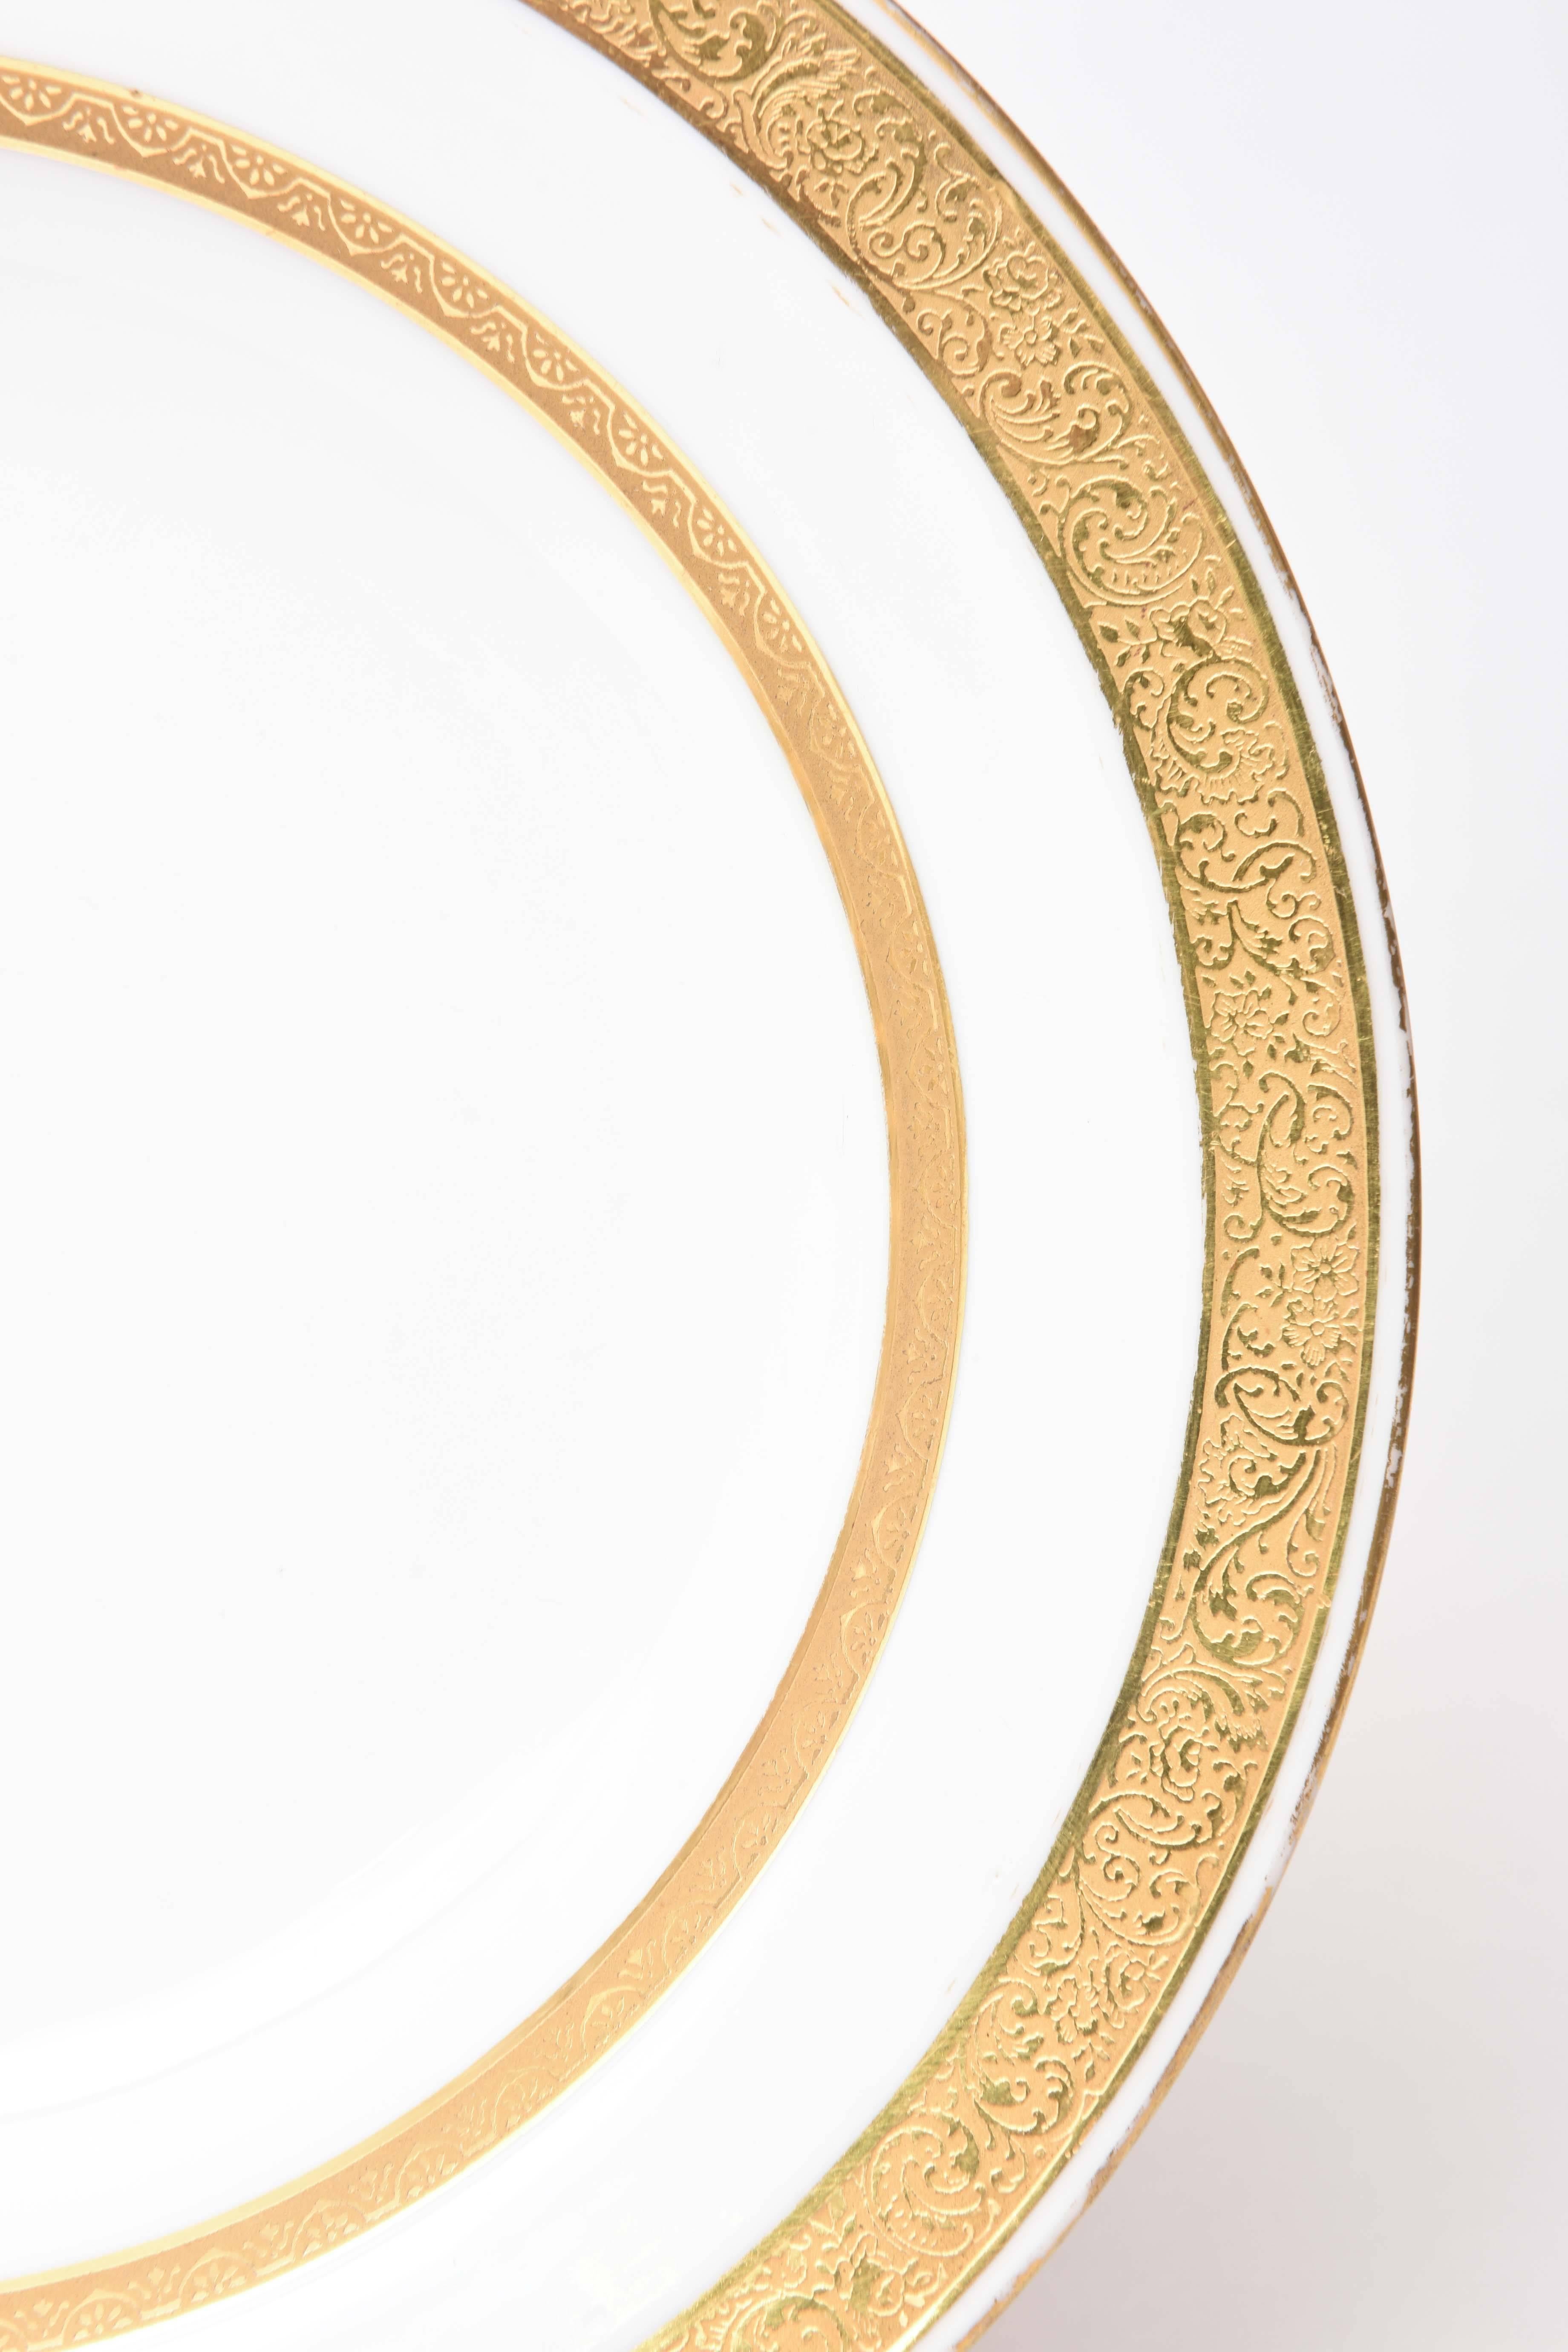 Always a need! A set of 12 rimmed soup bowls perfect for soups, pastas, salads and desserts. Custom ordered through Tiffany's at the turn of the last century and highlighted with two acid etched gilt bands. Simple and elegant and ready to mix and